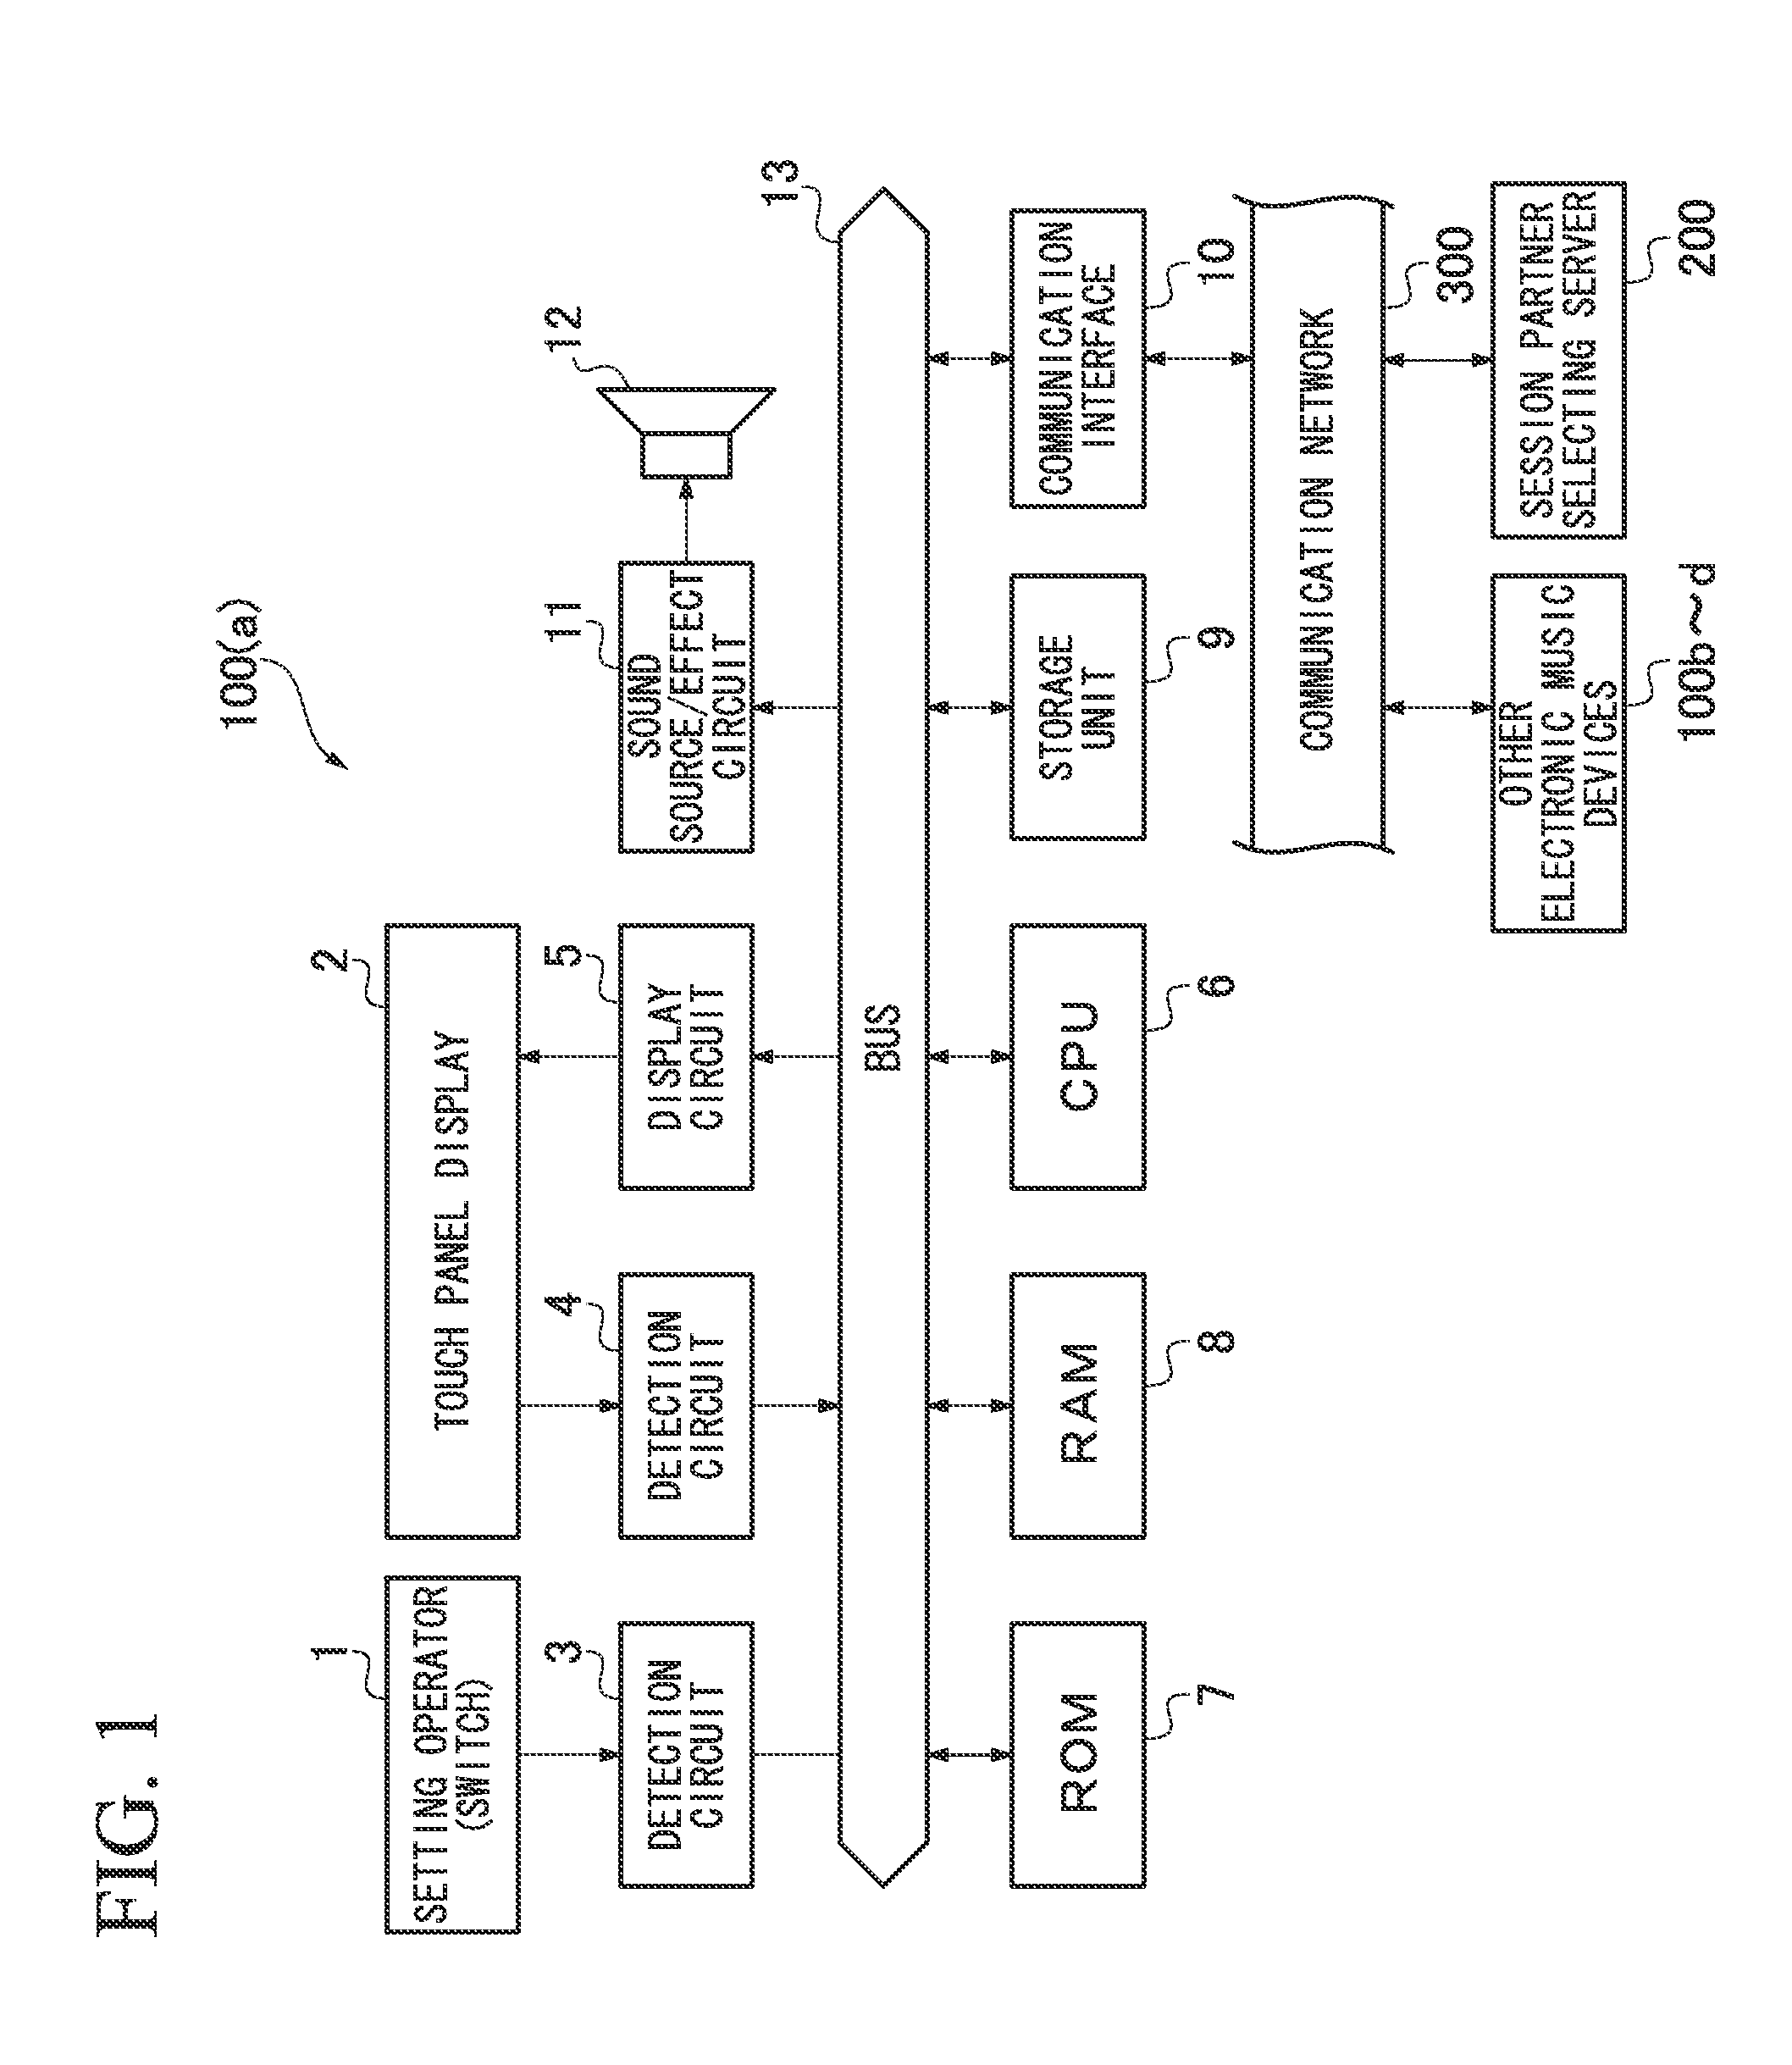 Online real-time session control method for electronic music device